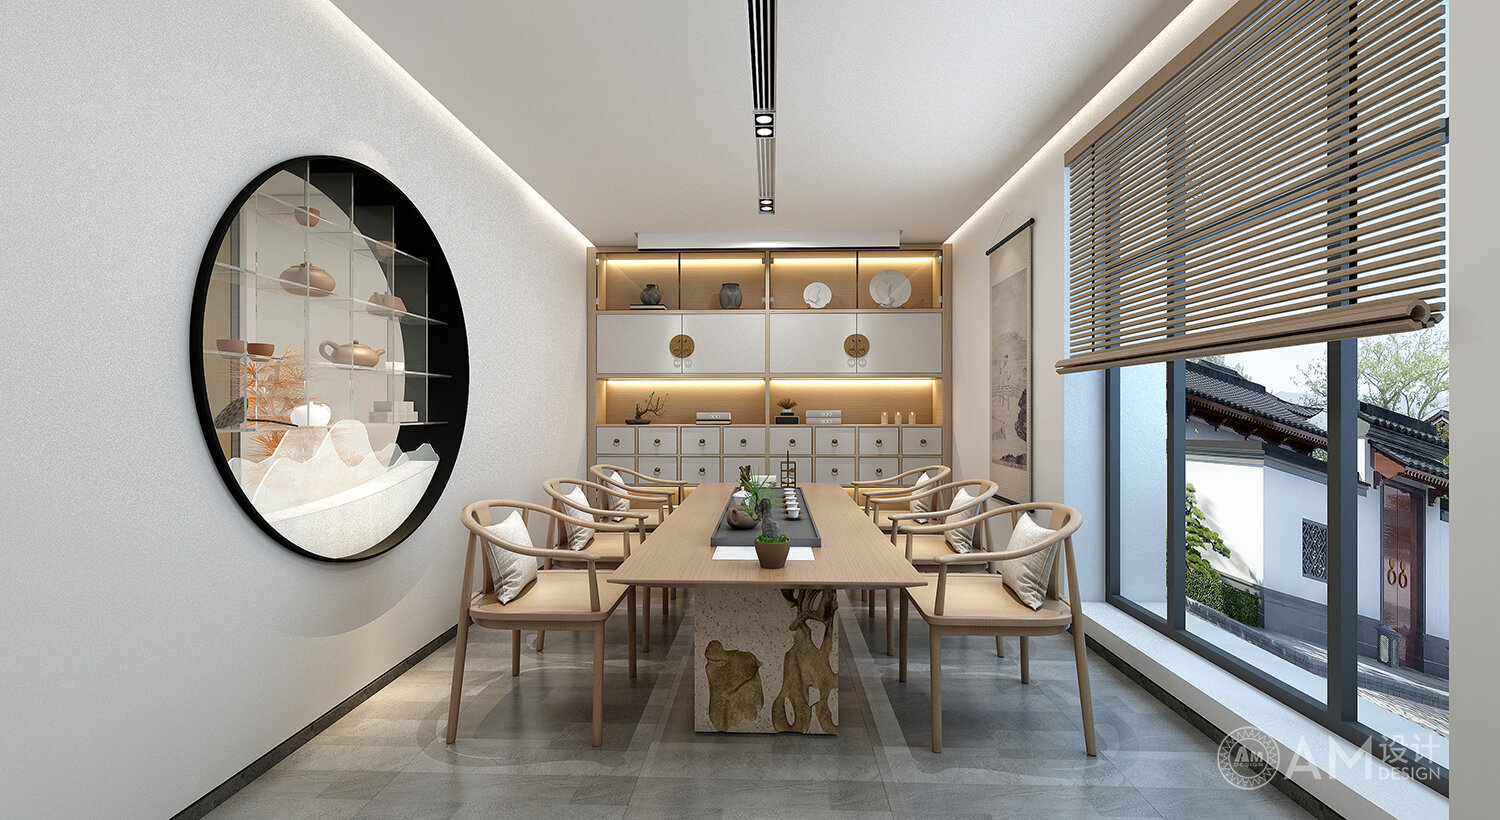 AM DESIGN | Tea room design for the clubhouse of Beijing Friendship Hotel